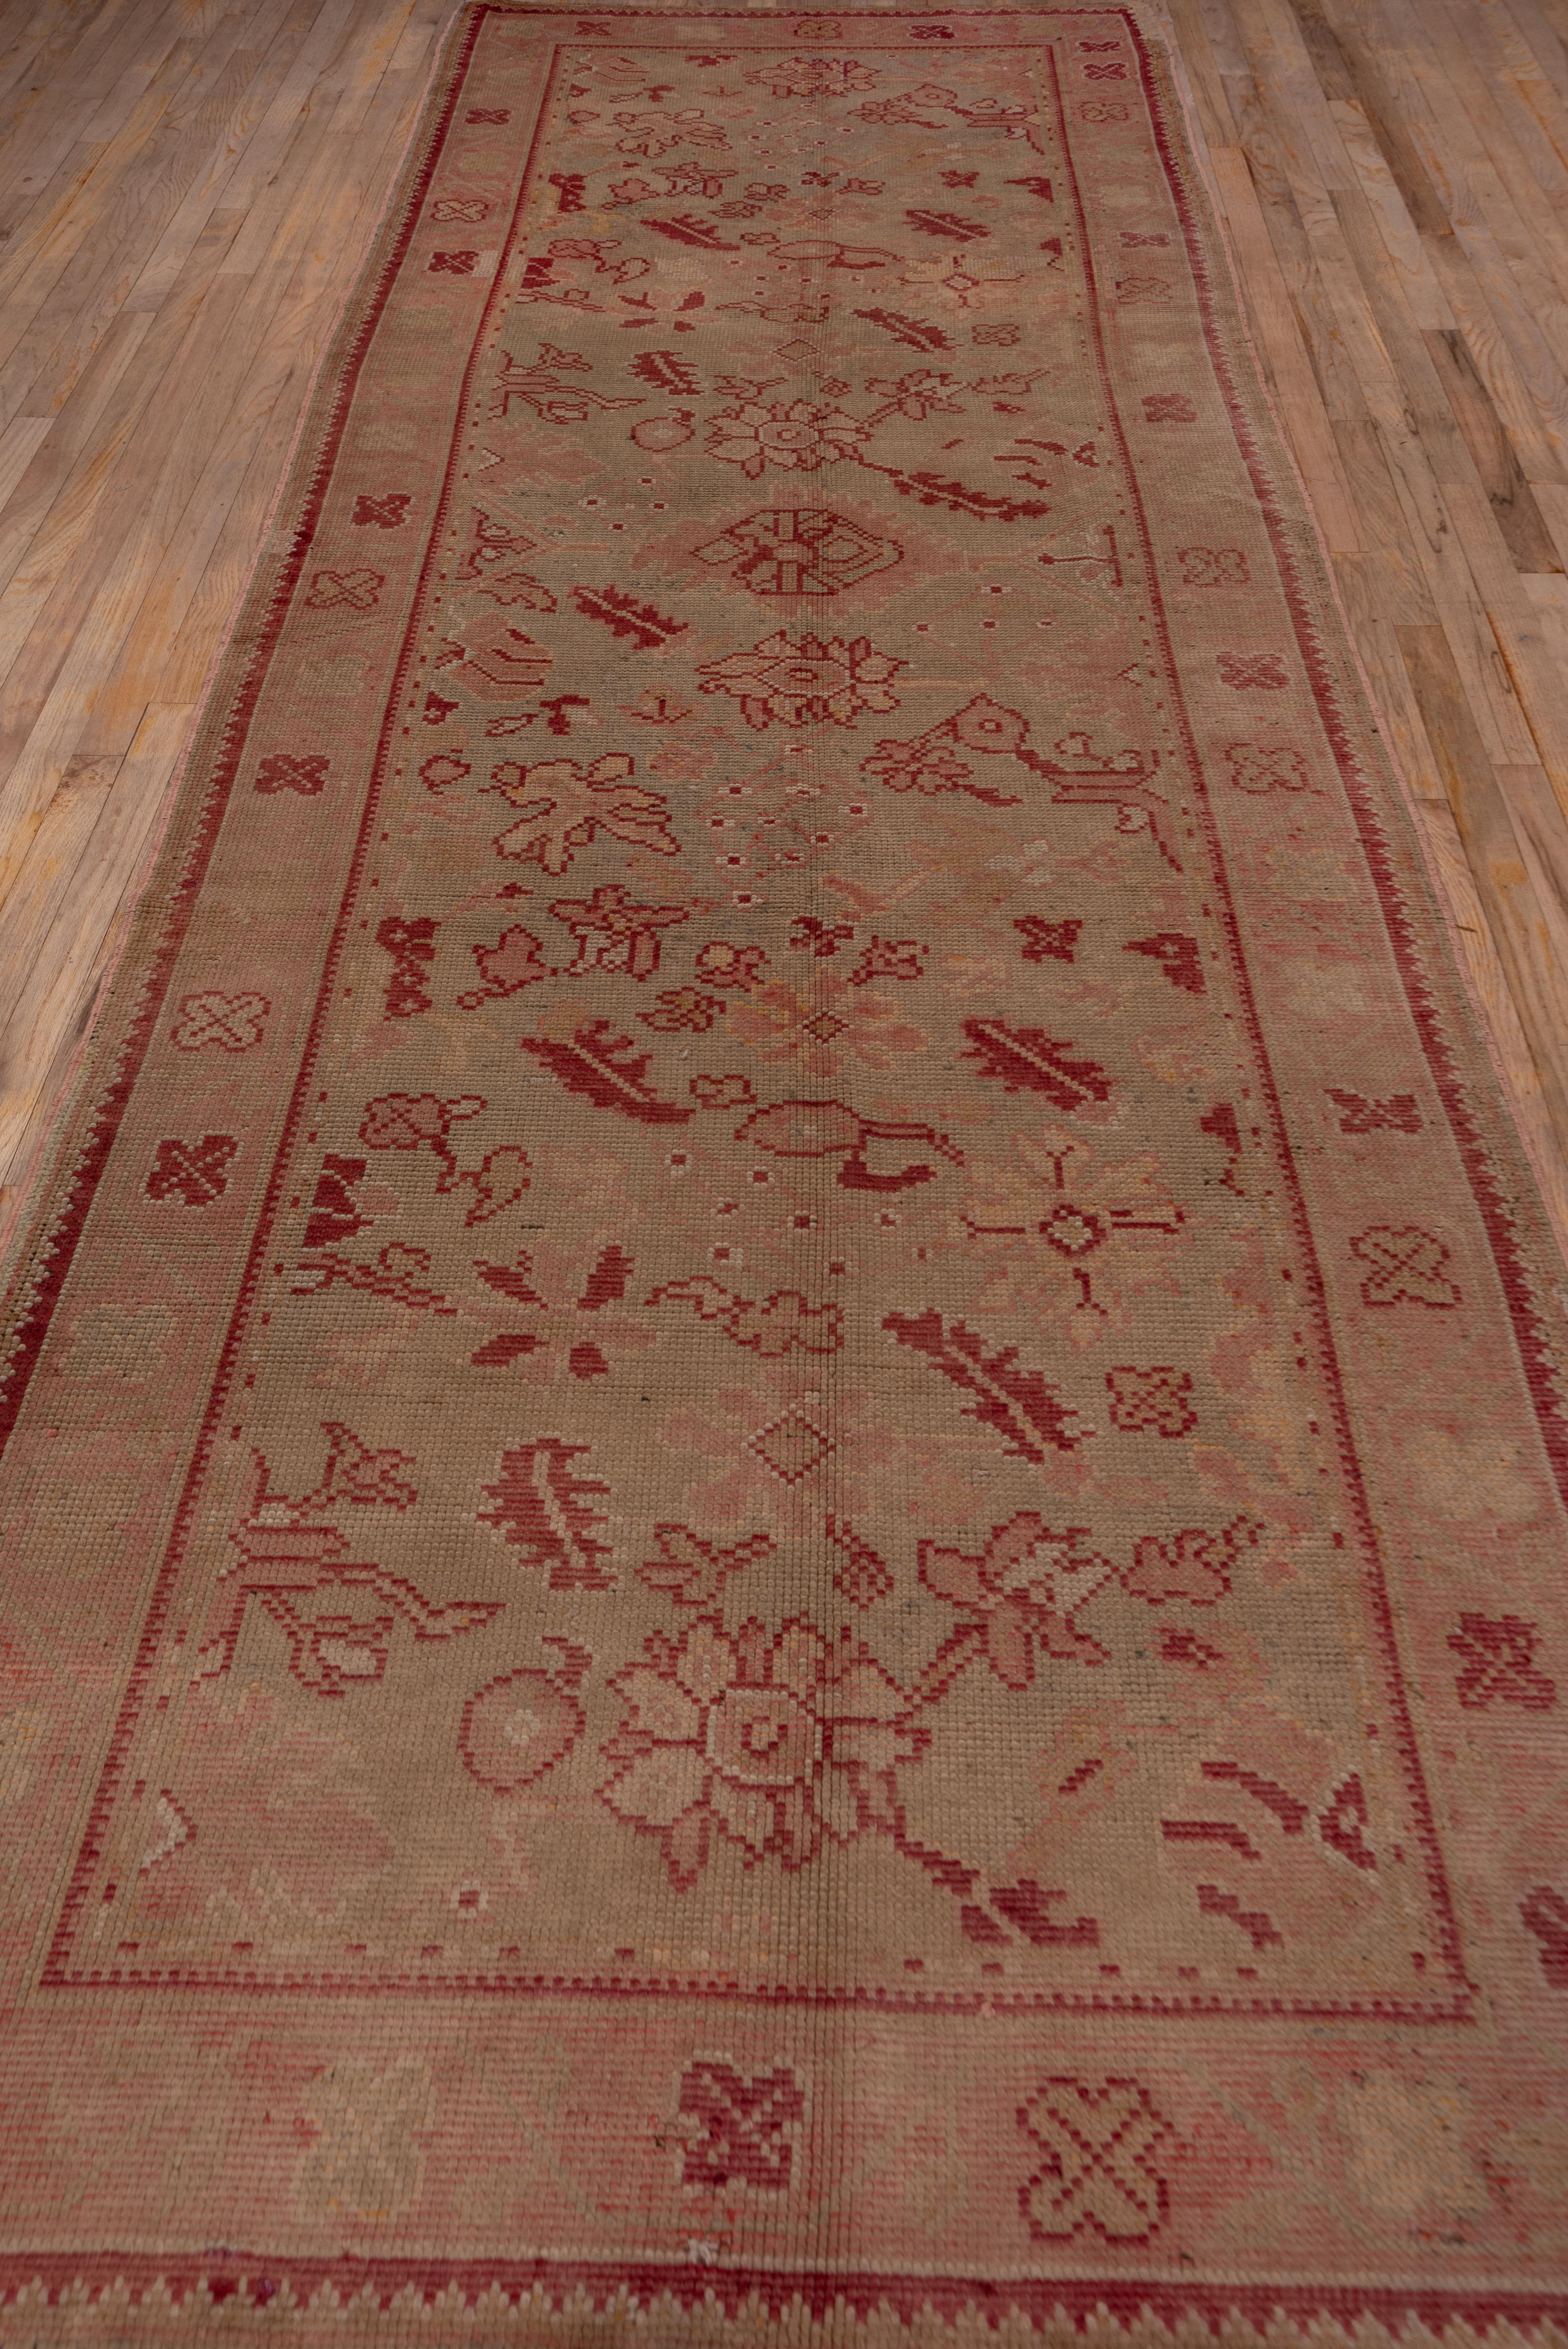 This antique Dutch gallery carpet has a Persian Harshang palmette, leaf and flower pattern has been fragmented and rearranged on the sand ground, with accents in buff, light brown and beige. Simple ragged palmettes accent the center line of the